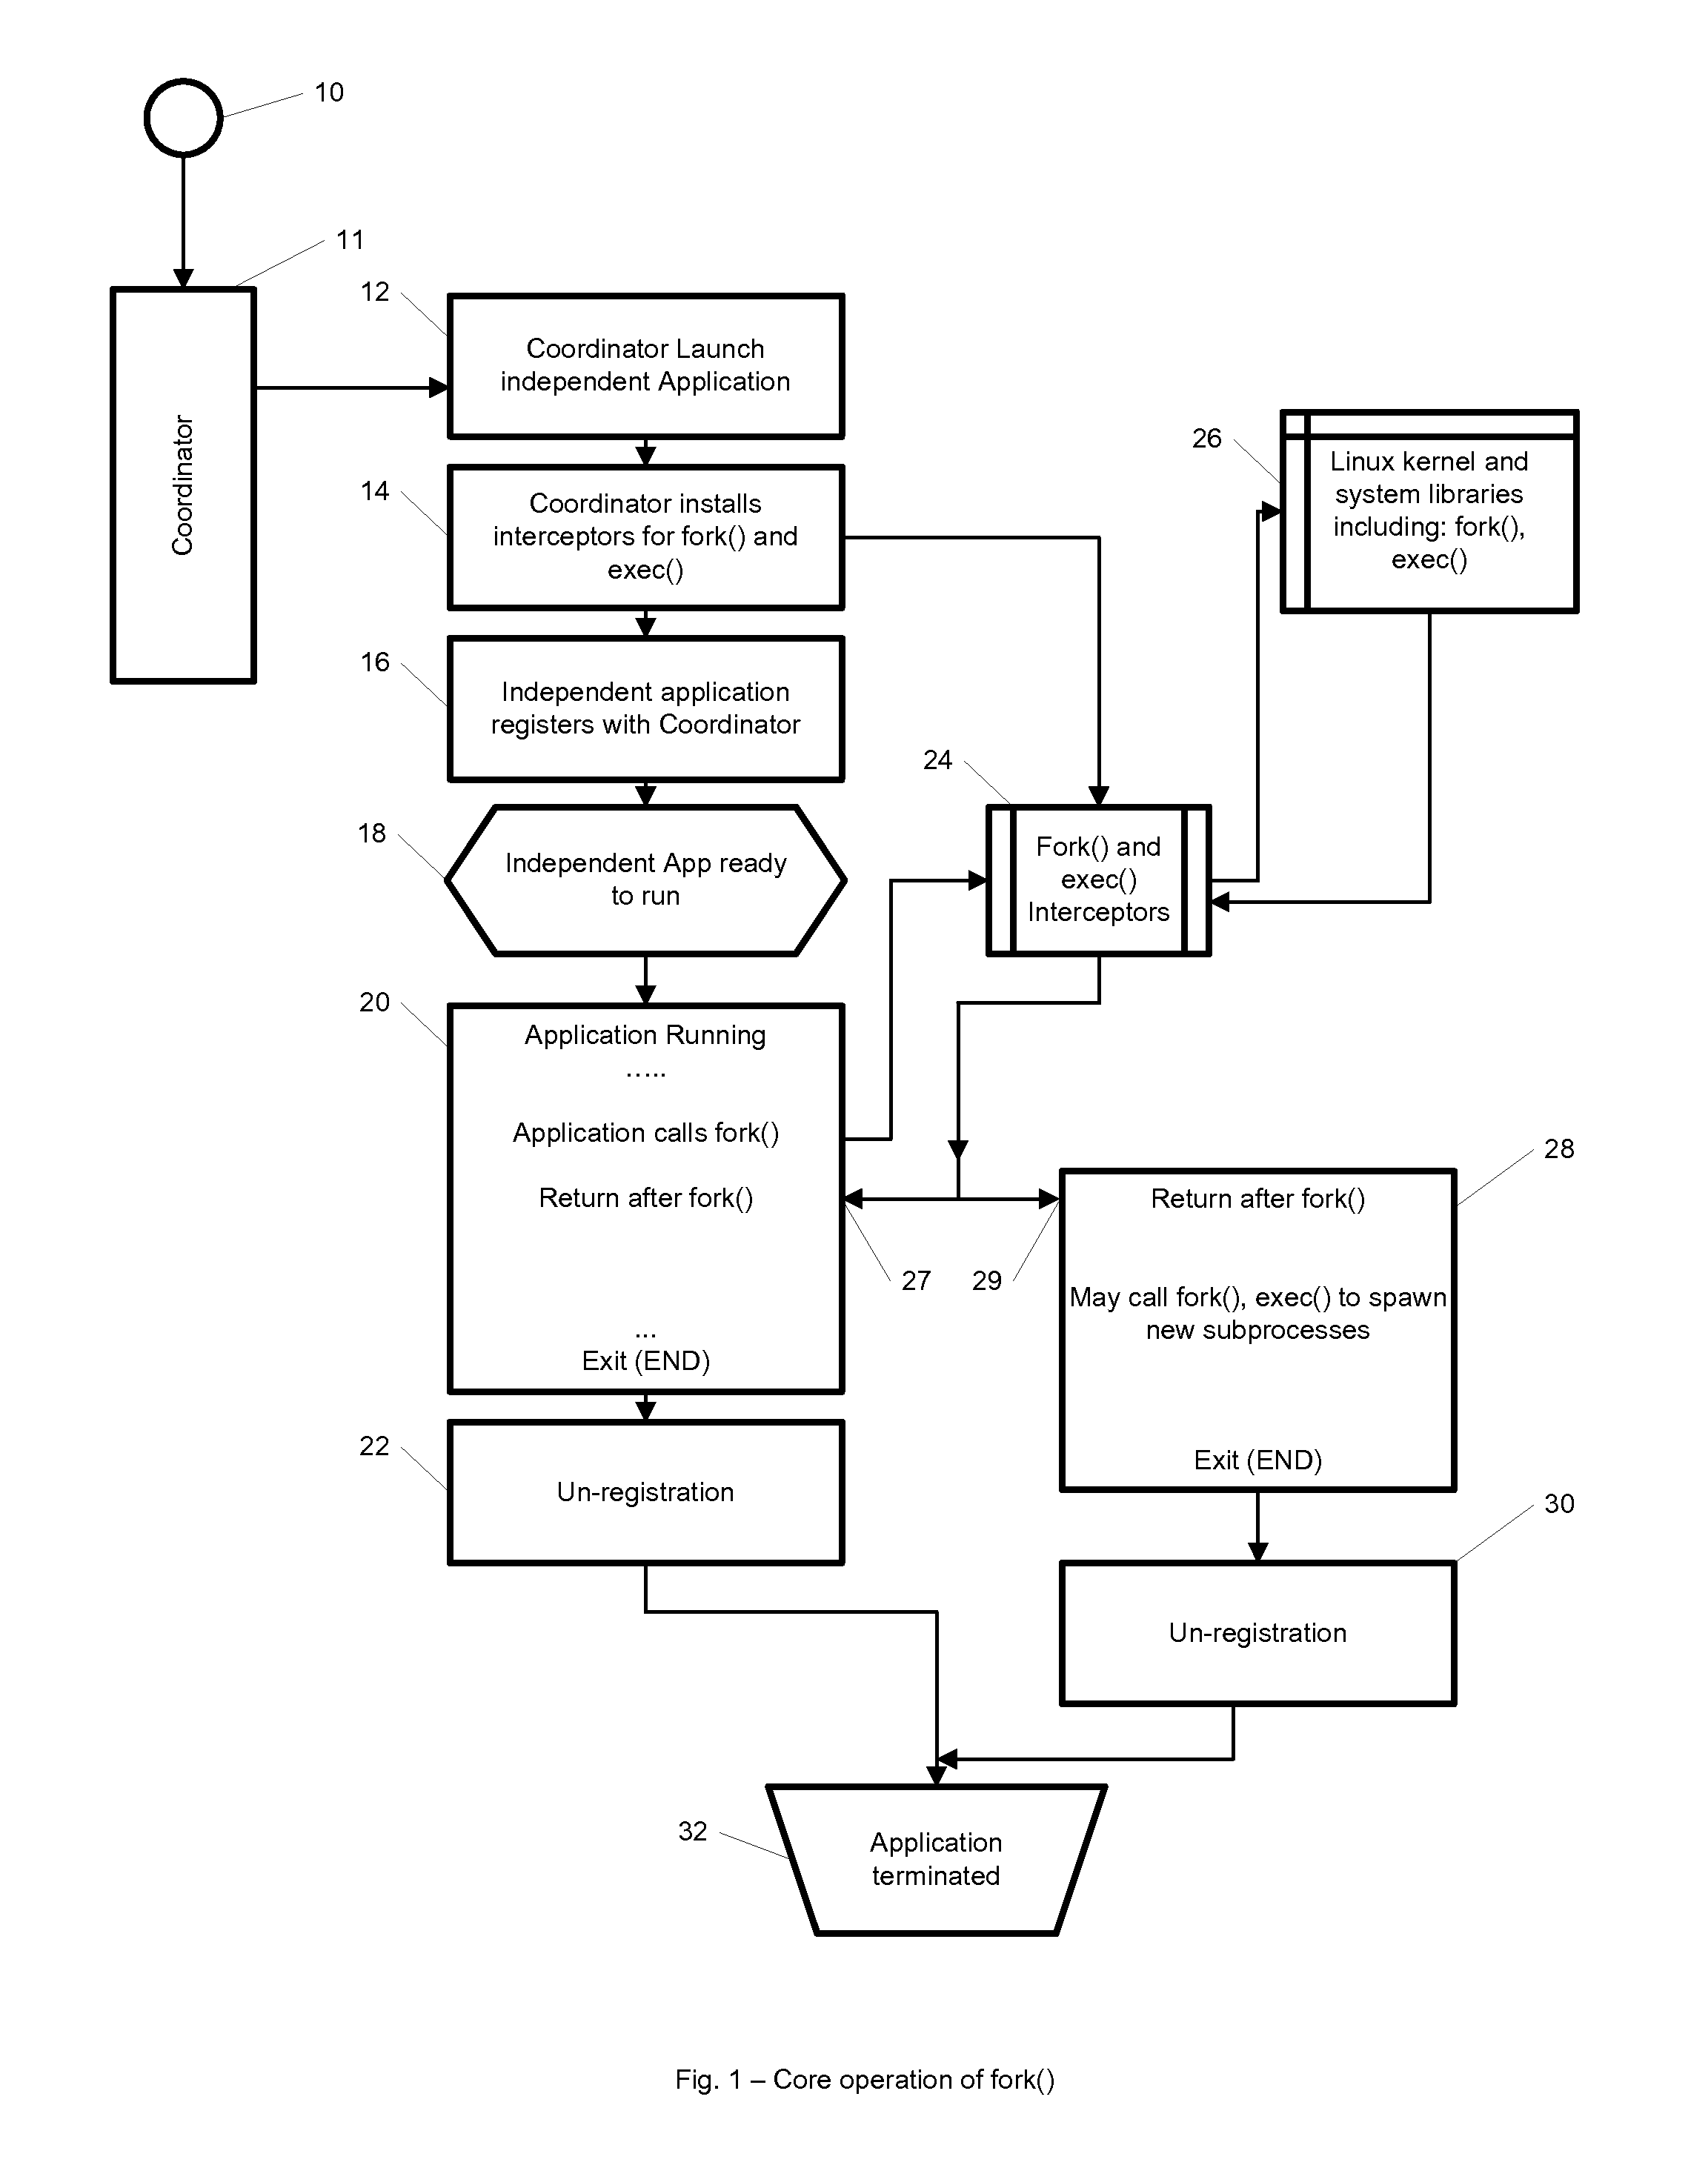 Method and system for providing storage checkpointing to a group of independent computer applications